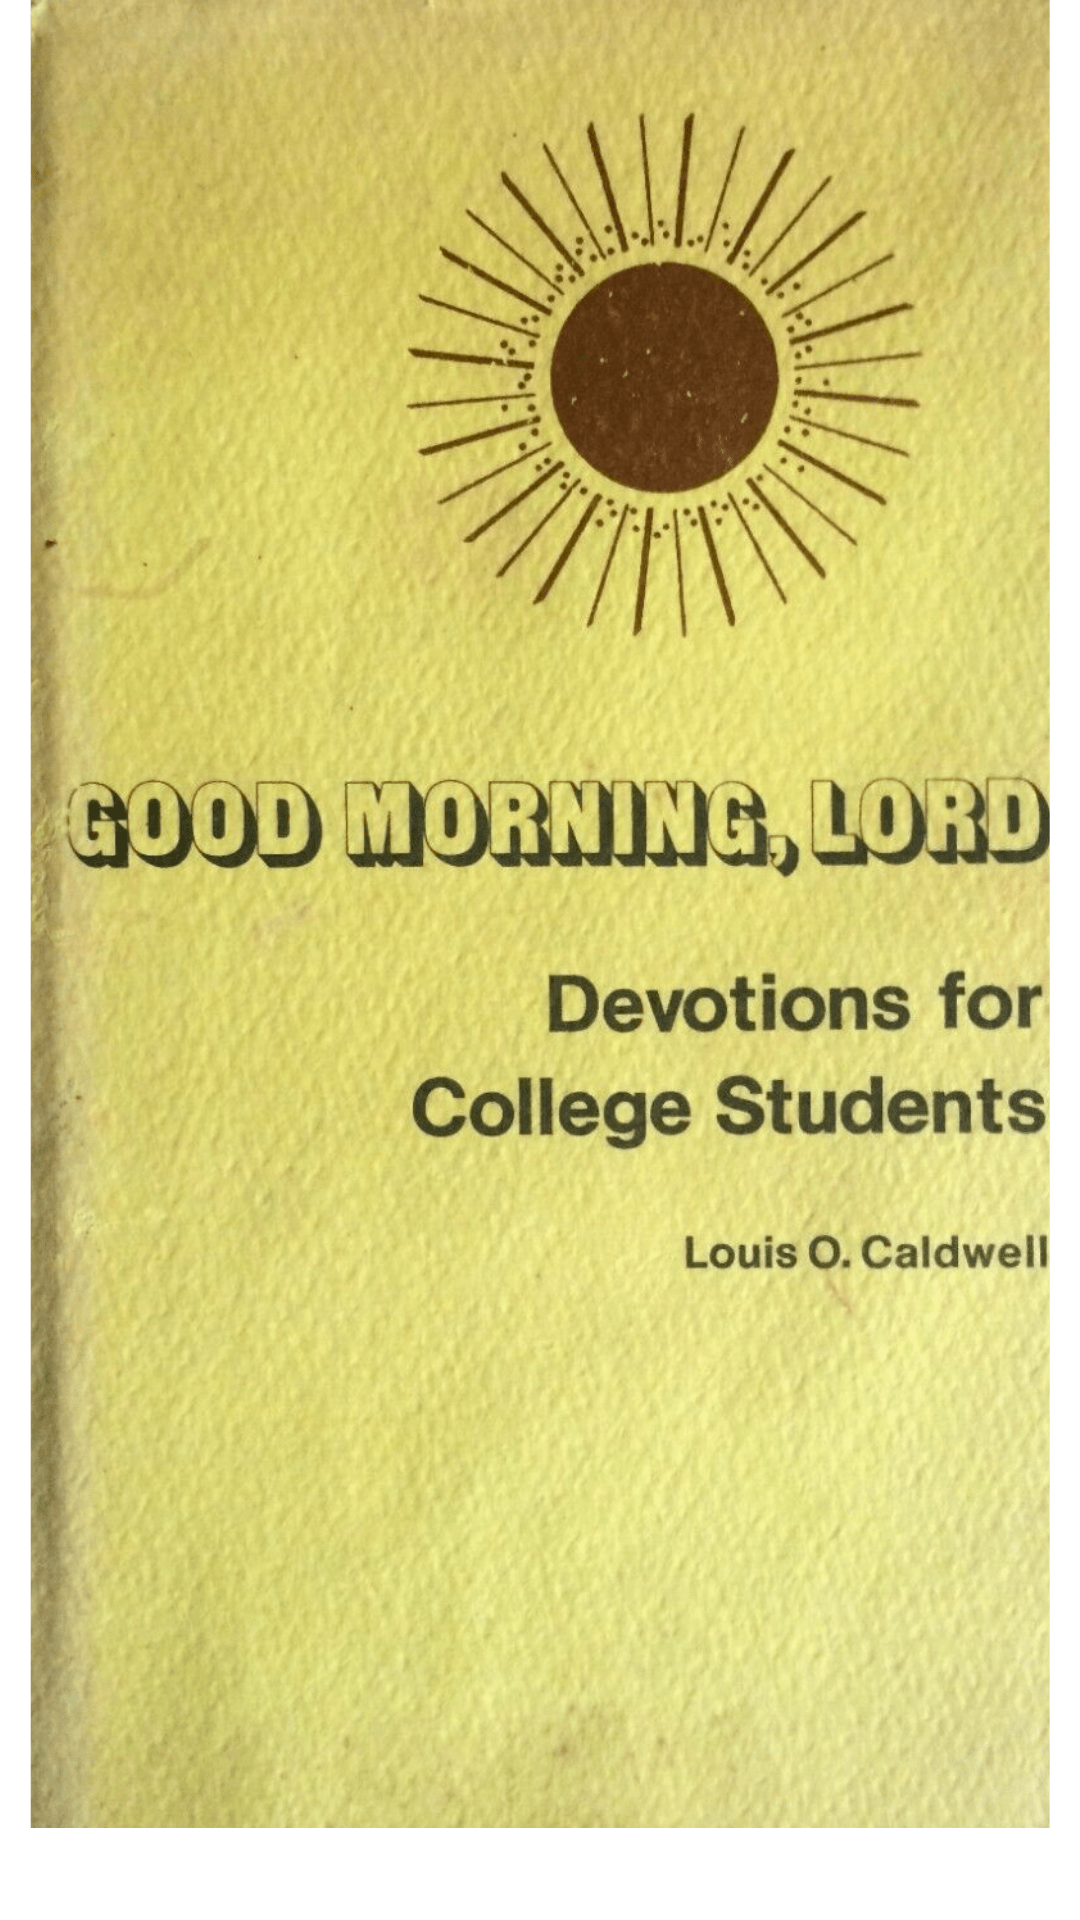 Good Morning, Lord: Devotions for College Students